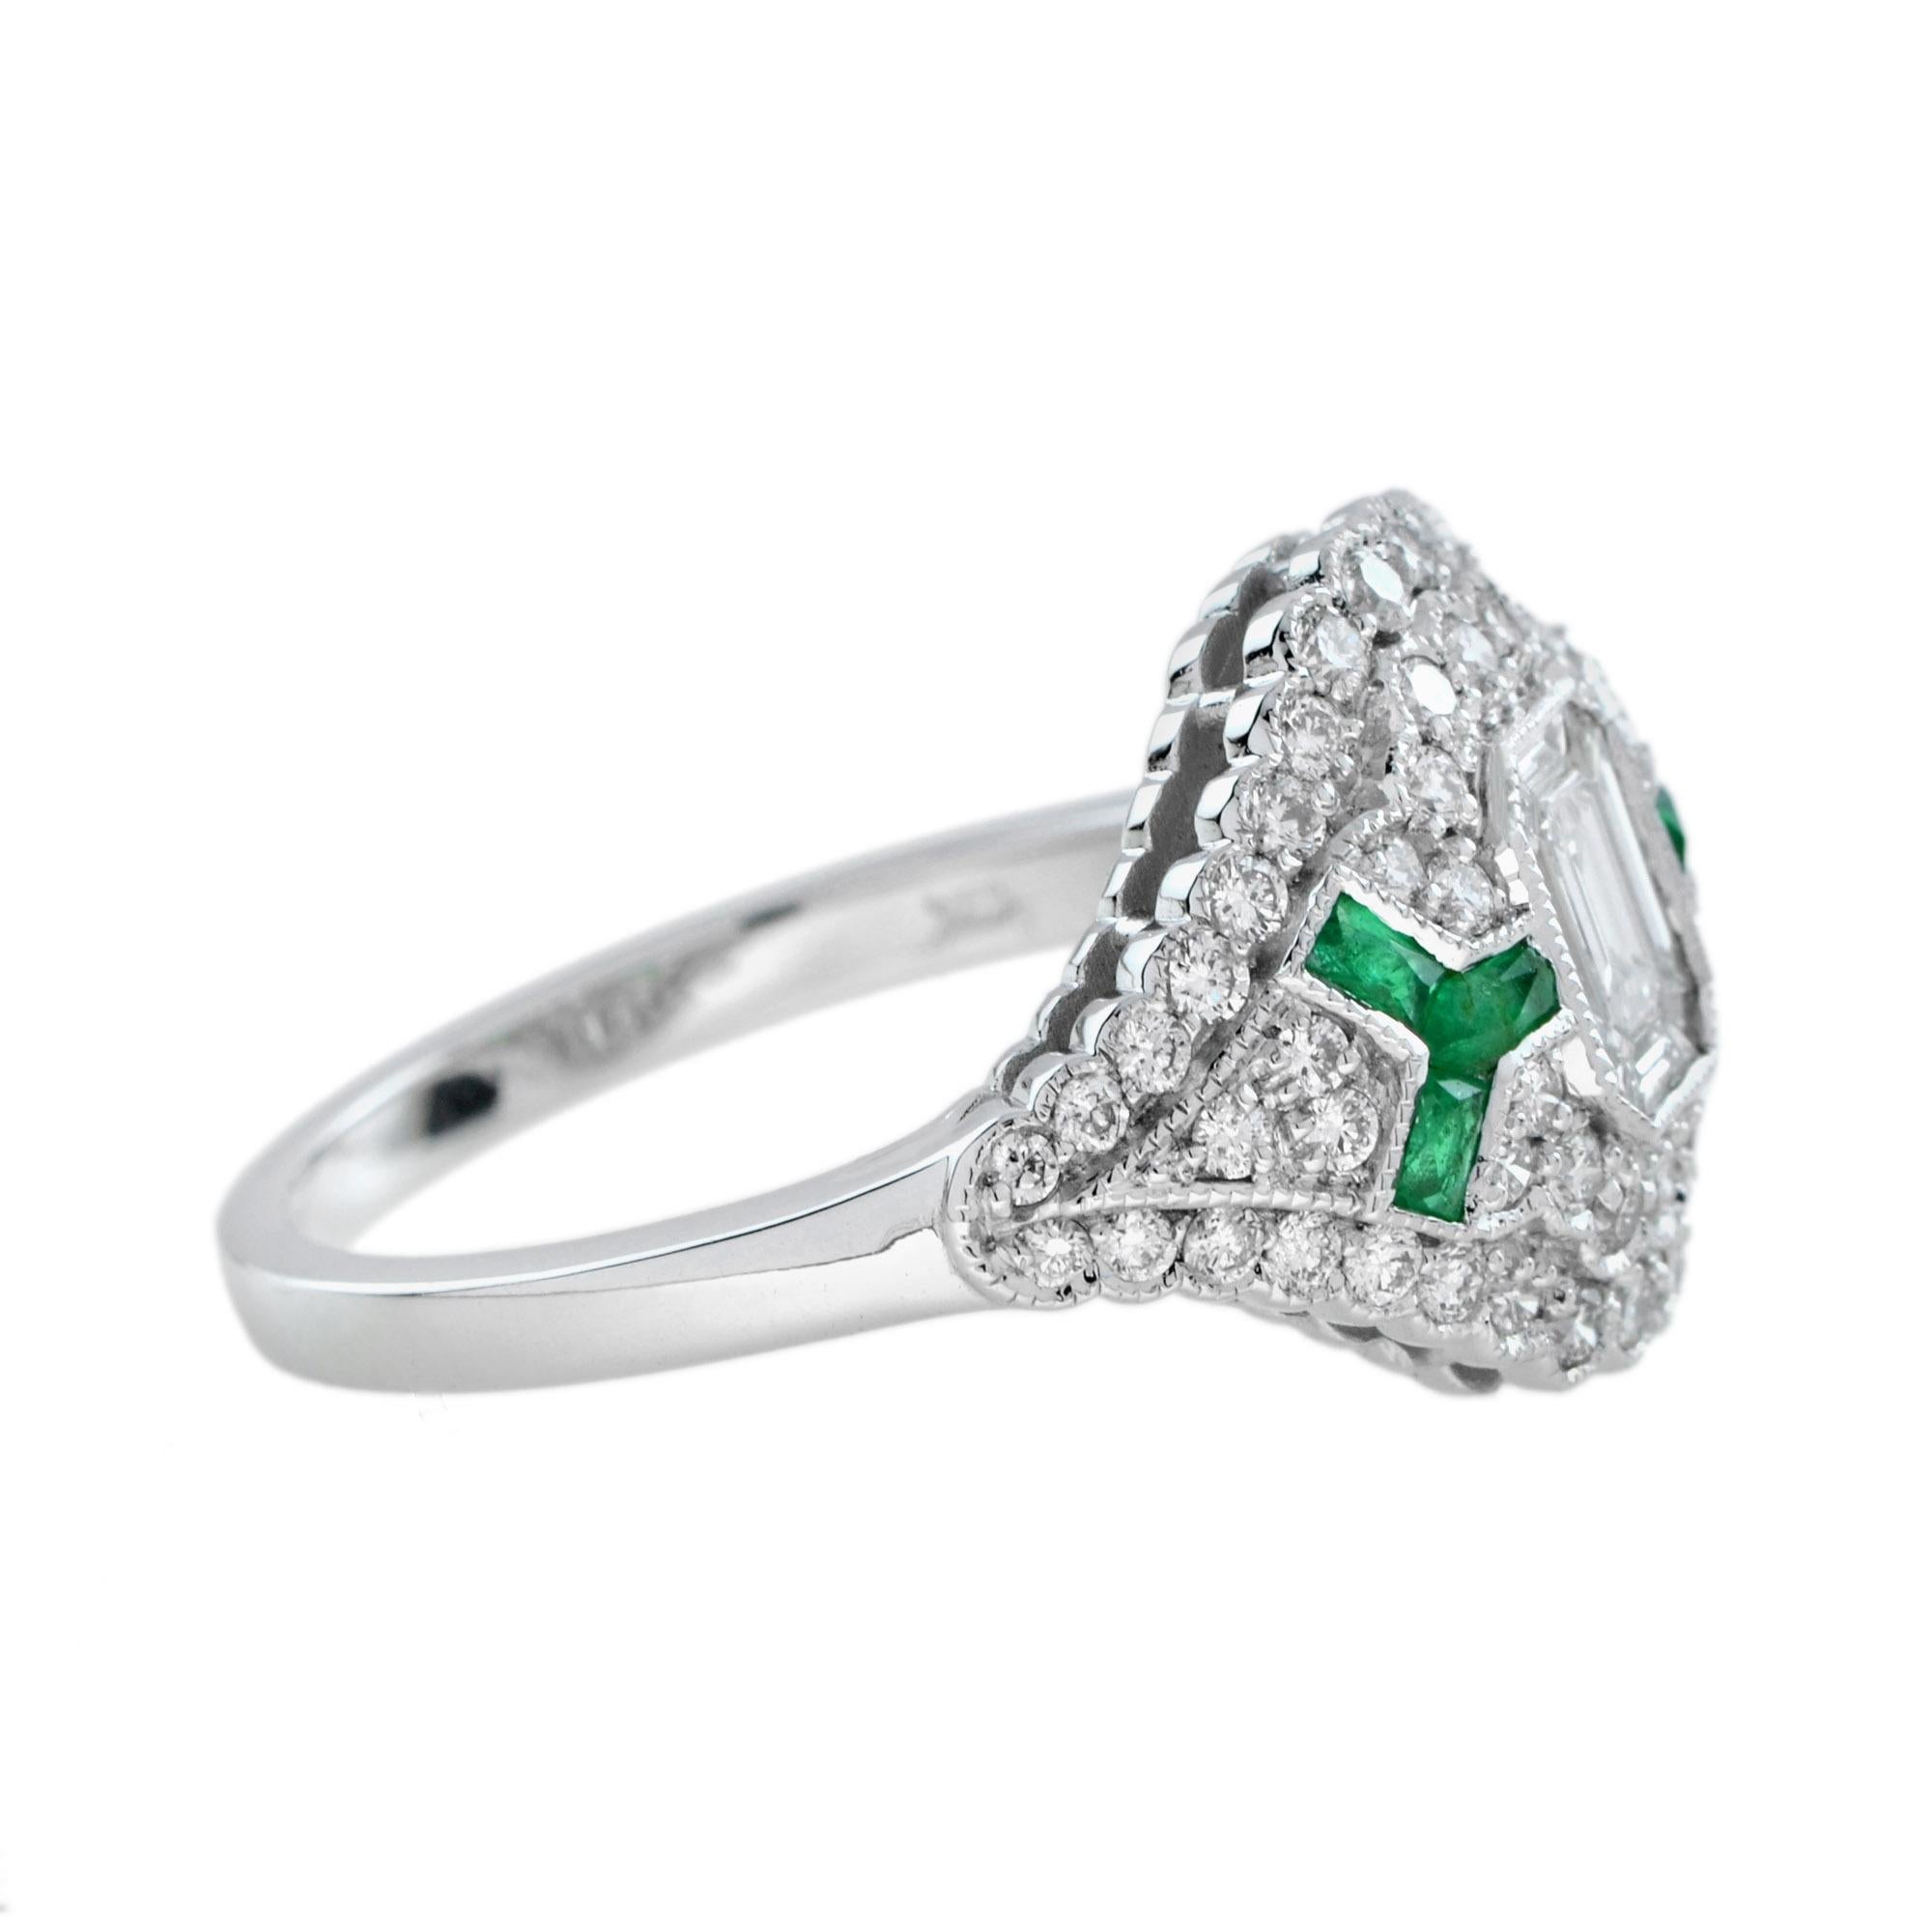 For Sale:  Emerald Cut Diamond and Emerald Art Deco Style Ring in 18K White Gold 4